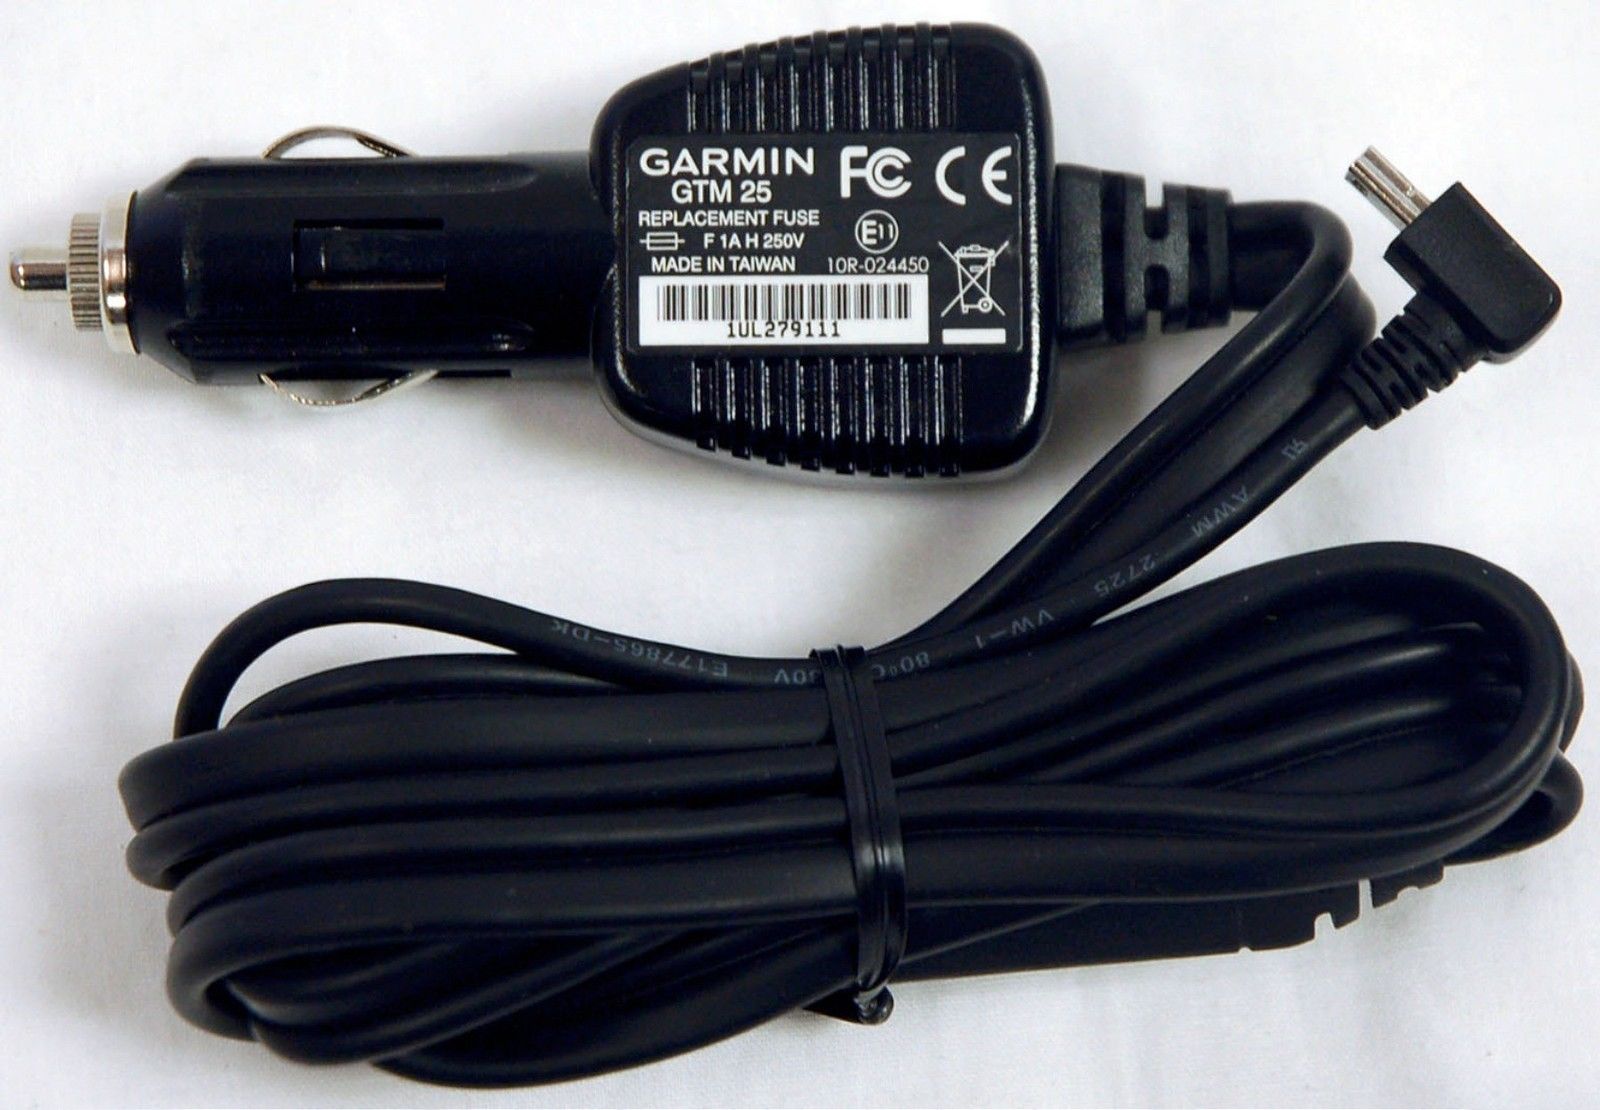 GENUiNE GARMiN GTM 25 CHARGER RECEiVER WiTH LiFETiME TRAFFiC 